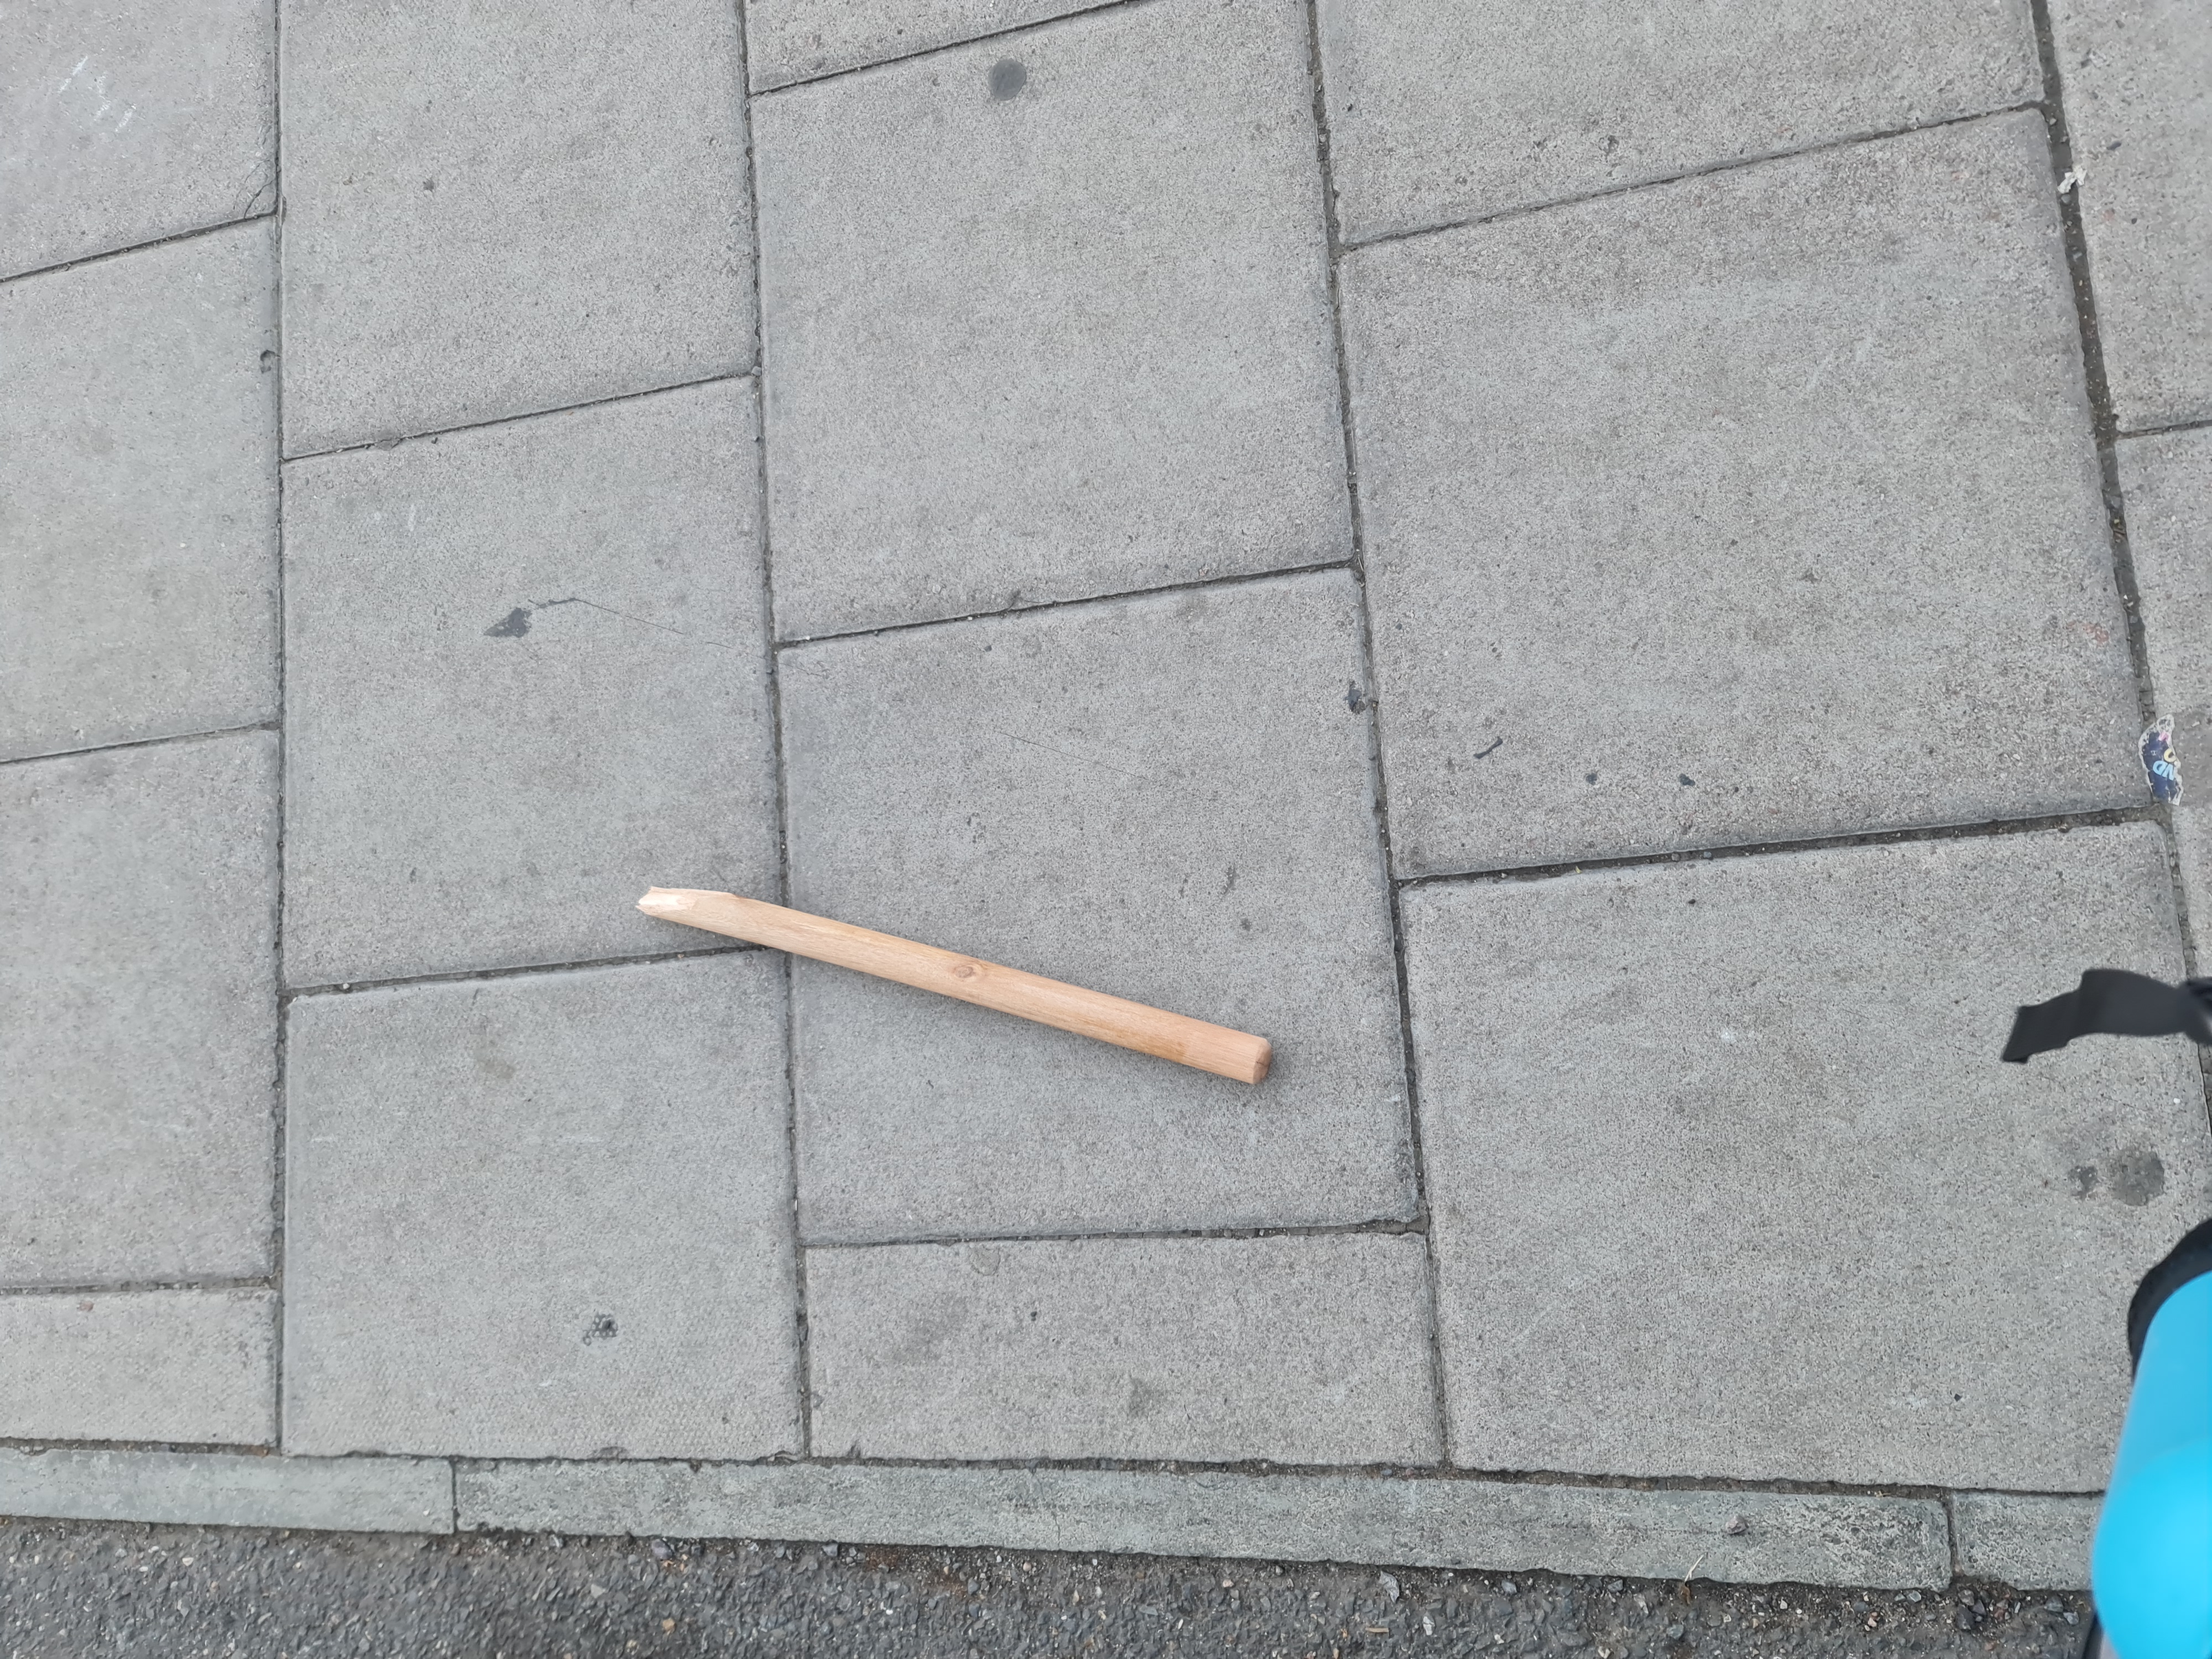 Snapped piece of broom handle lying on the street